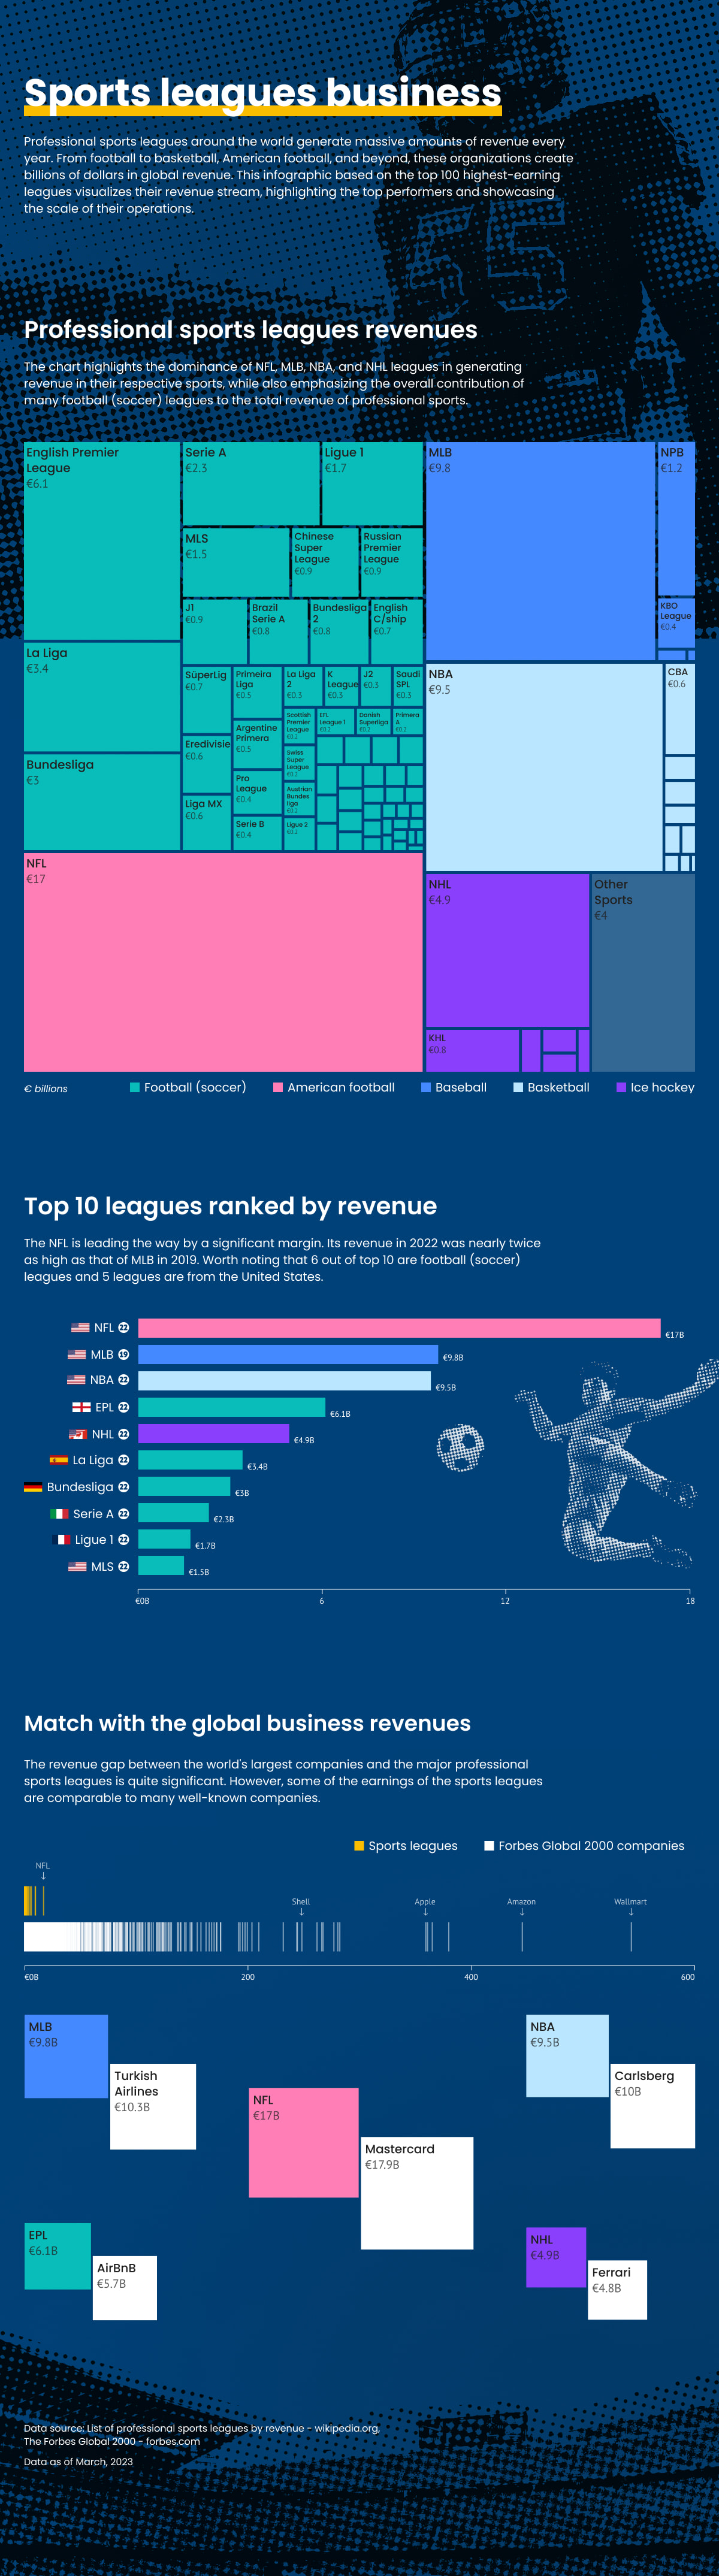 Professional sports leagues around the world generate massive amounts of revenue every year. From football to basketball, American football, and beyond, these organizations create billions of dollars in global revenue. This infographic based on the top 100 highest-earning leagues visualizes their revenue stream, highlighting the top performers and showcasing the scale of their operations.